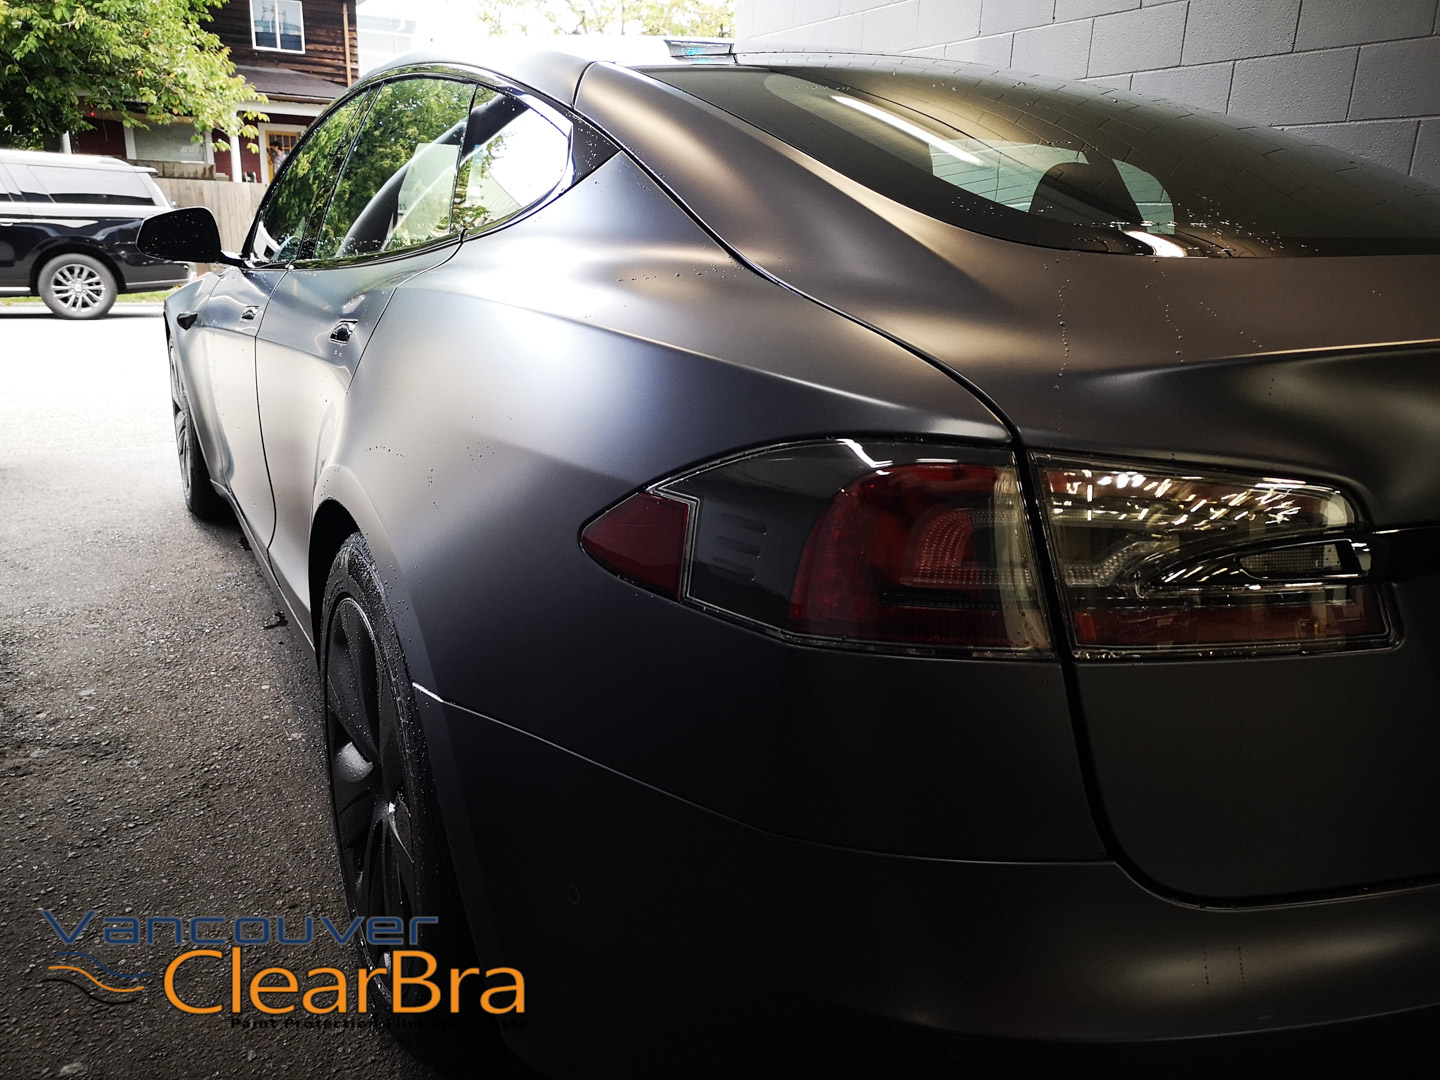 xpel-ultimate-xpel-stealth-satin-clear-bra-paint-protection-film-Vancouver-ClearBra-1035.jpg